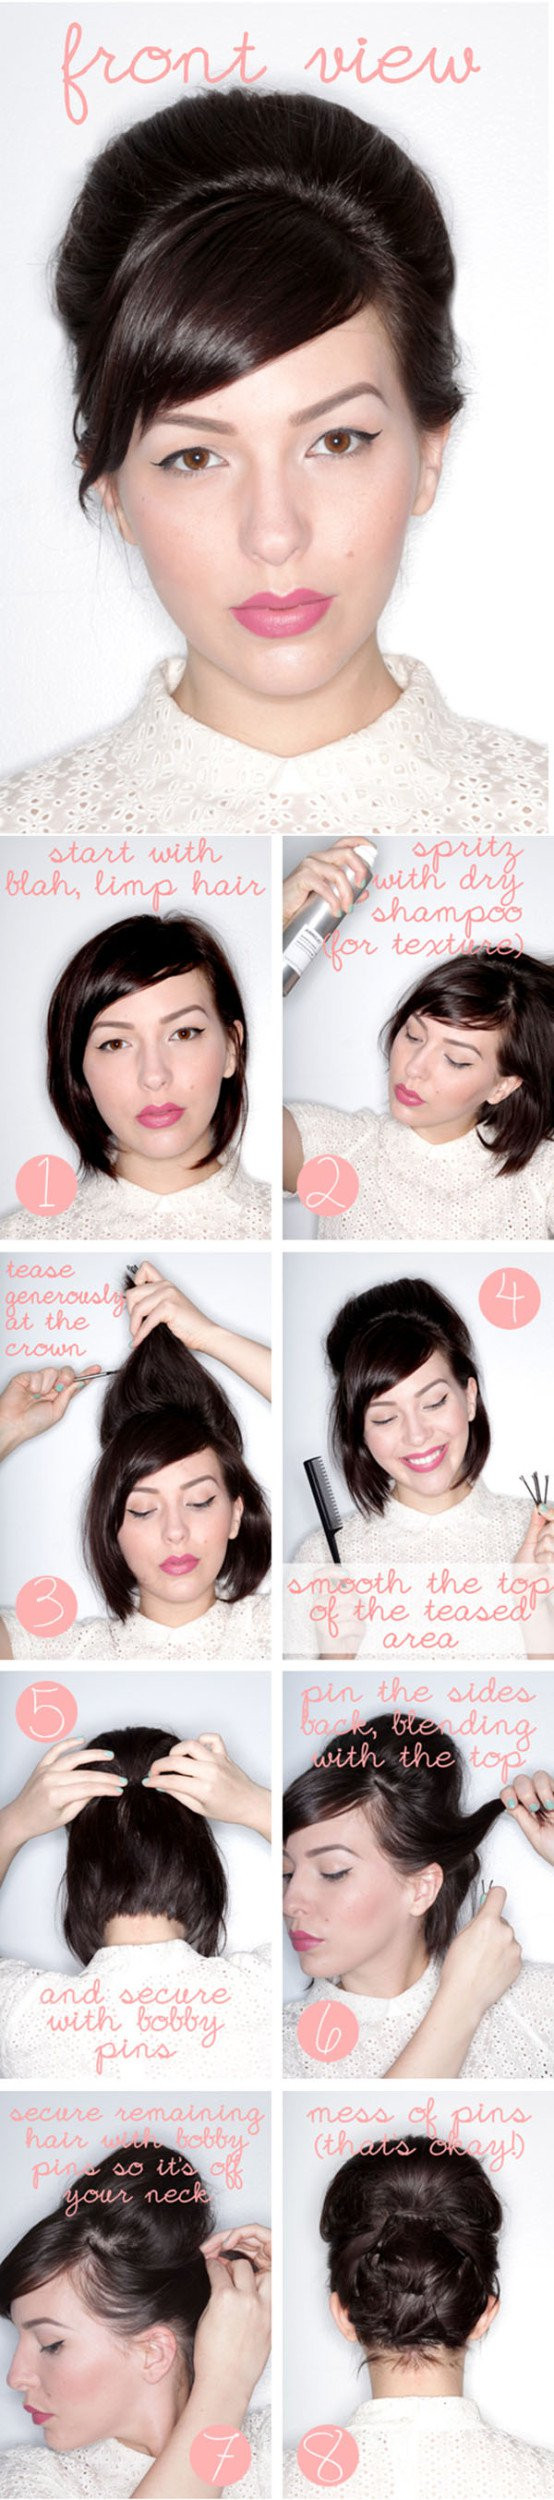 Hairstyle Tutorials For Short Hair
 17 Easy DIY Tutorials For Glamorous and Cute Hairstyle